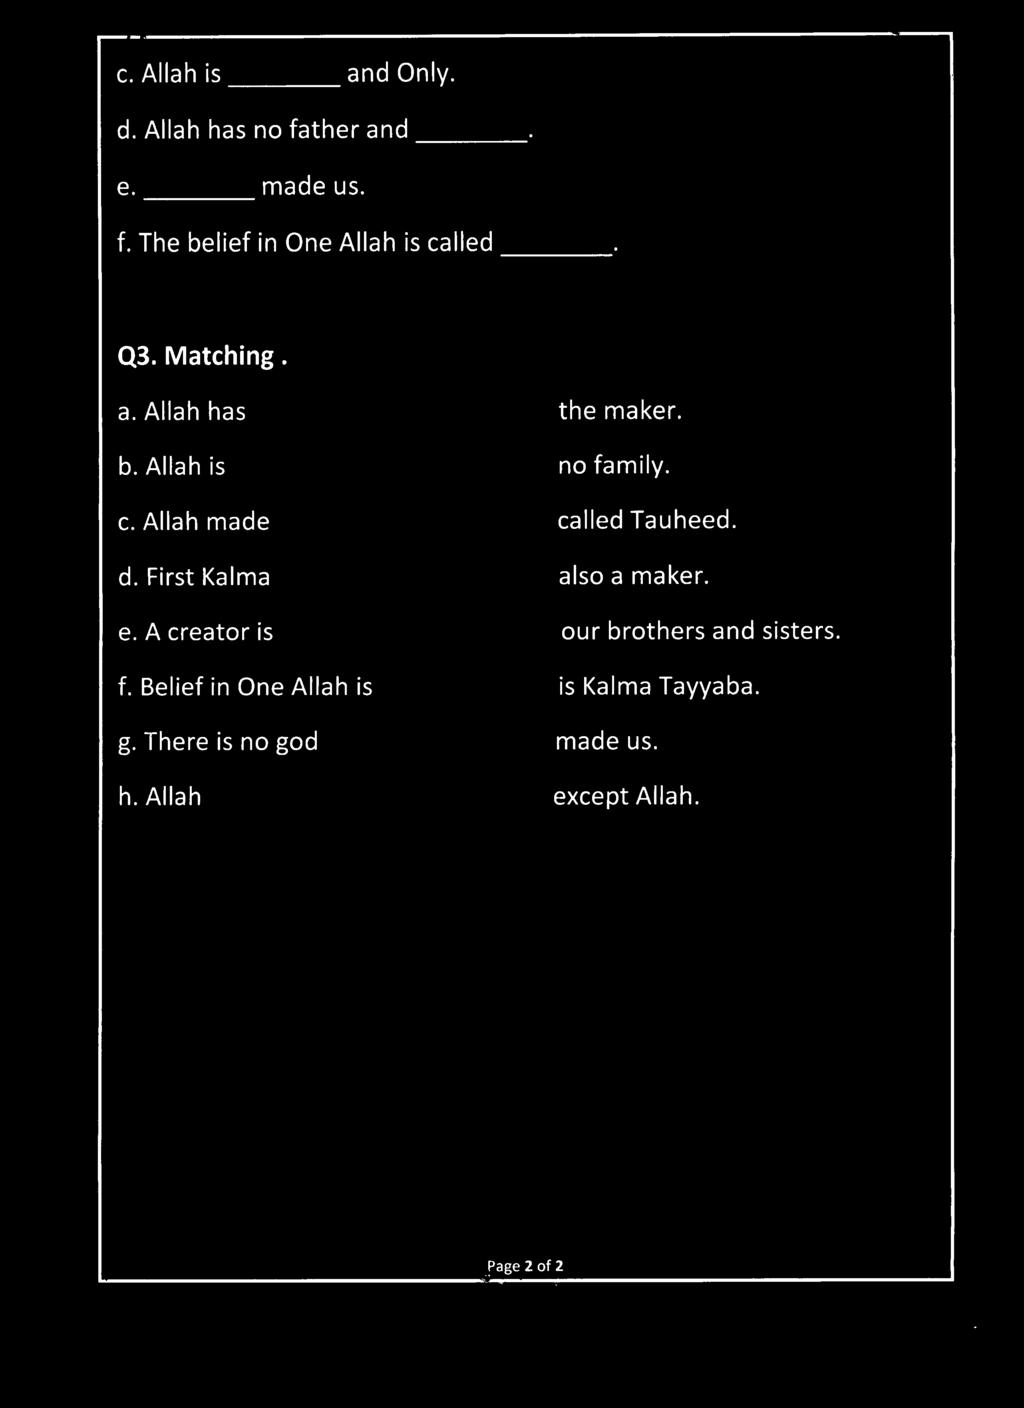 First Kalma the maker. no family. called Tauheed. also a maker. e. A creator is our brothers and sisters. f. Belief in One Allah is g.